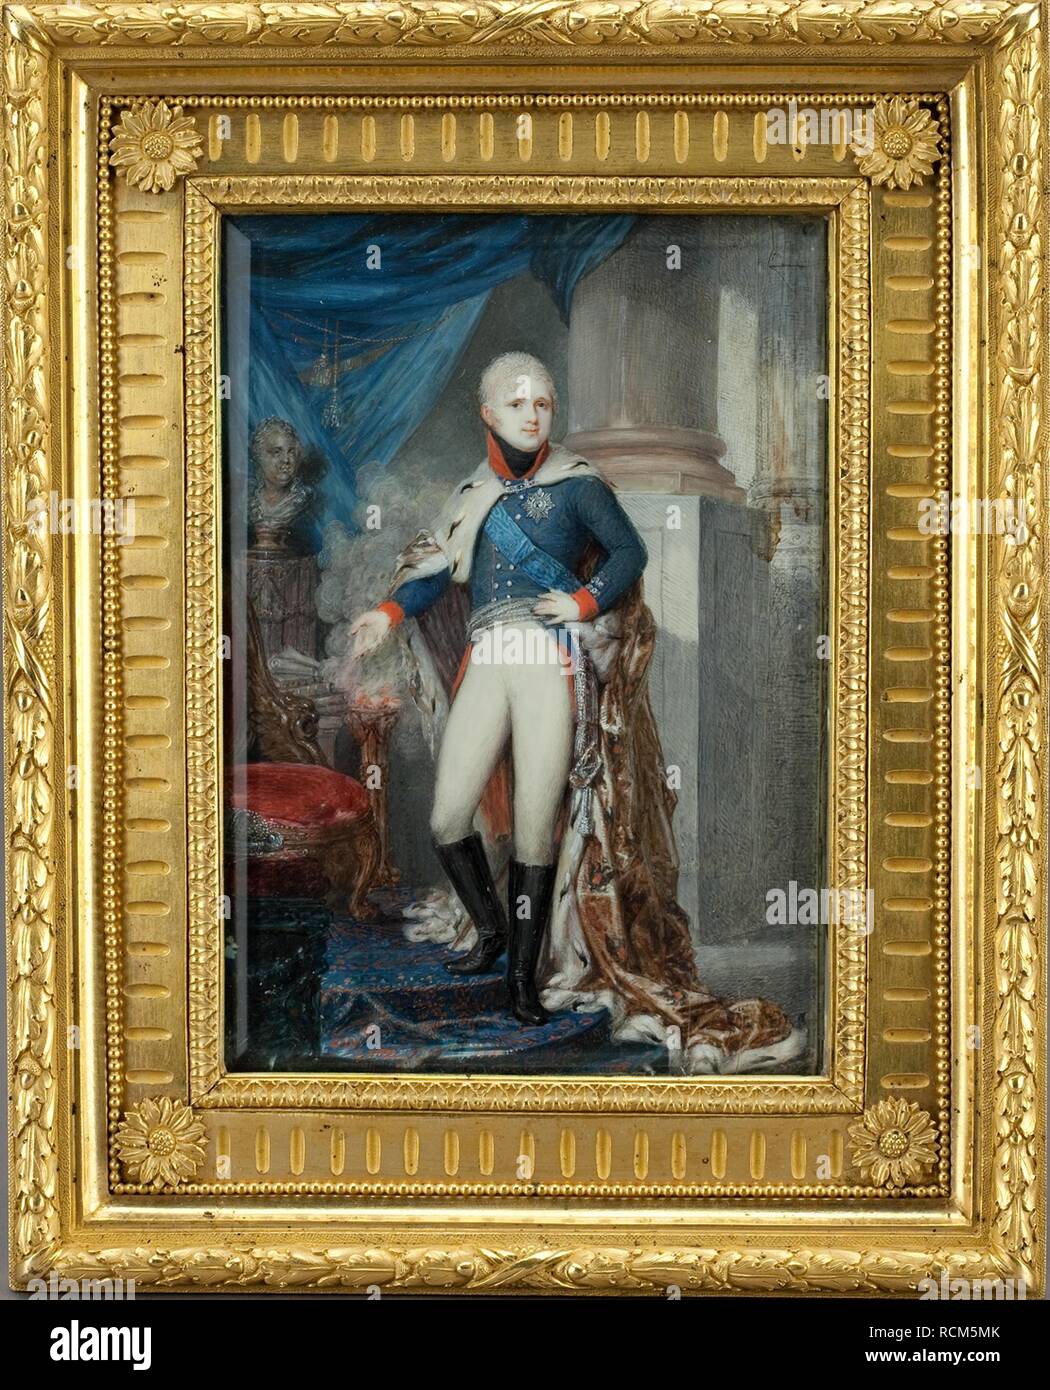 Portrait of Emperor Alexander I (1777-1825). Museum: State History Museum, Moscow. Author: Gerin, Jean. Stock Photo